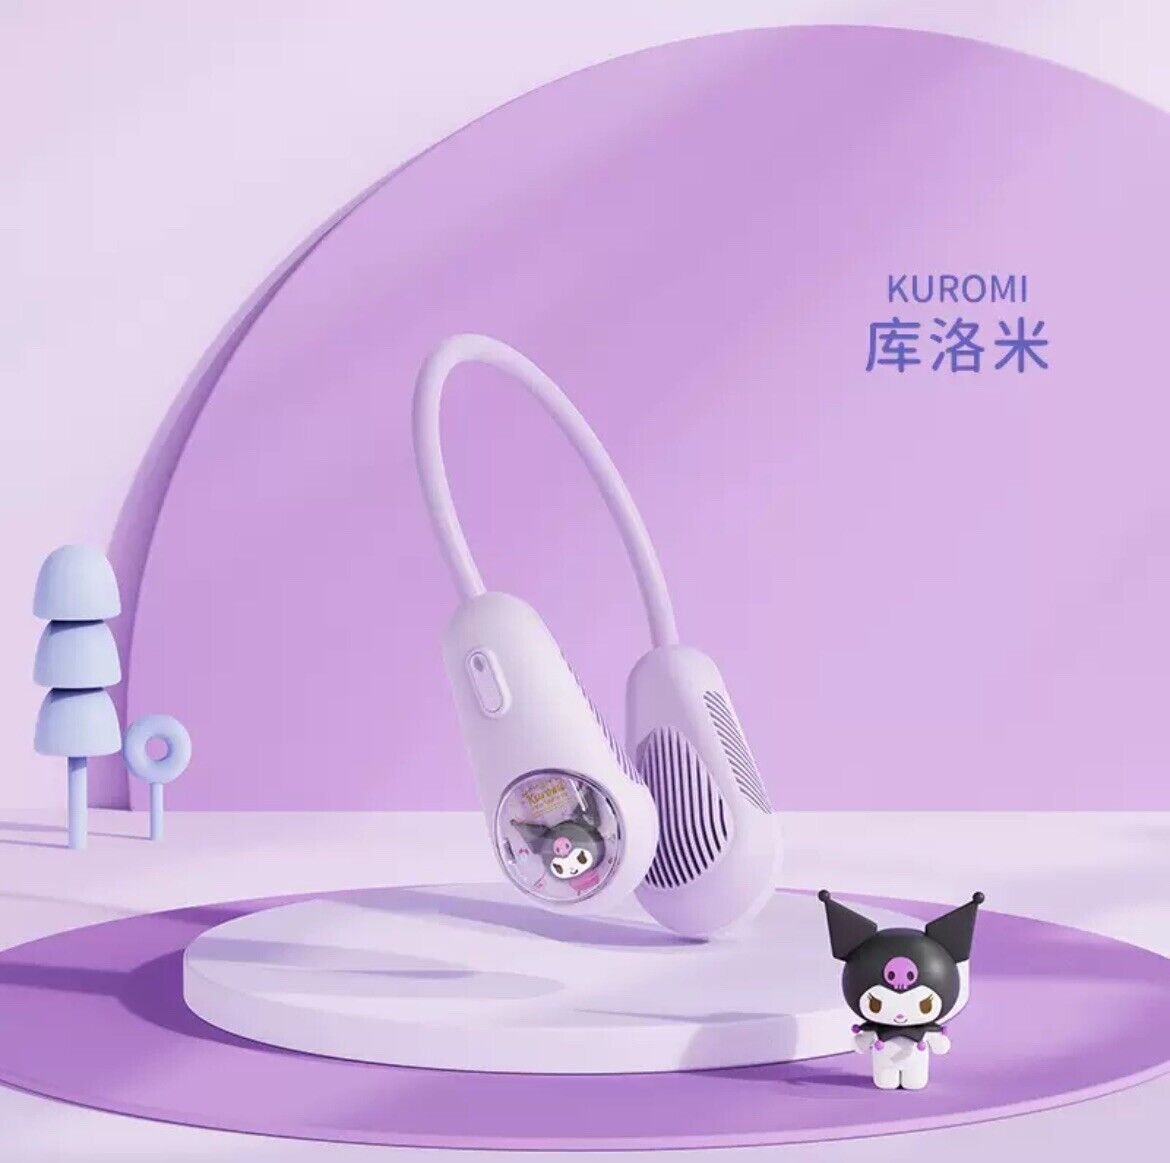 SANRIO Licensed Kuromi USB Chargable Light Weight Portable Neck Fan NEW